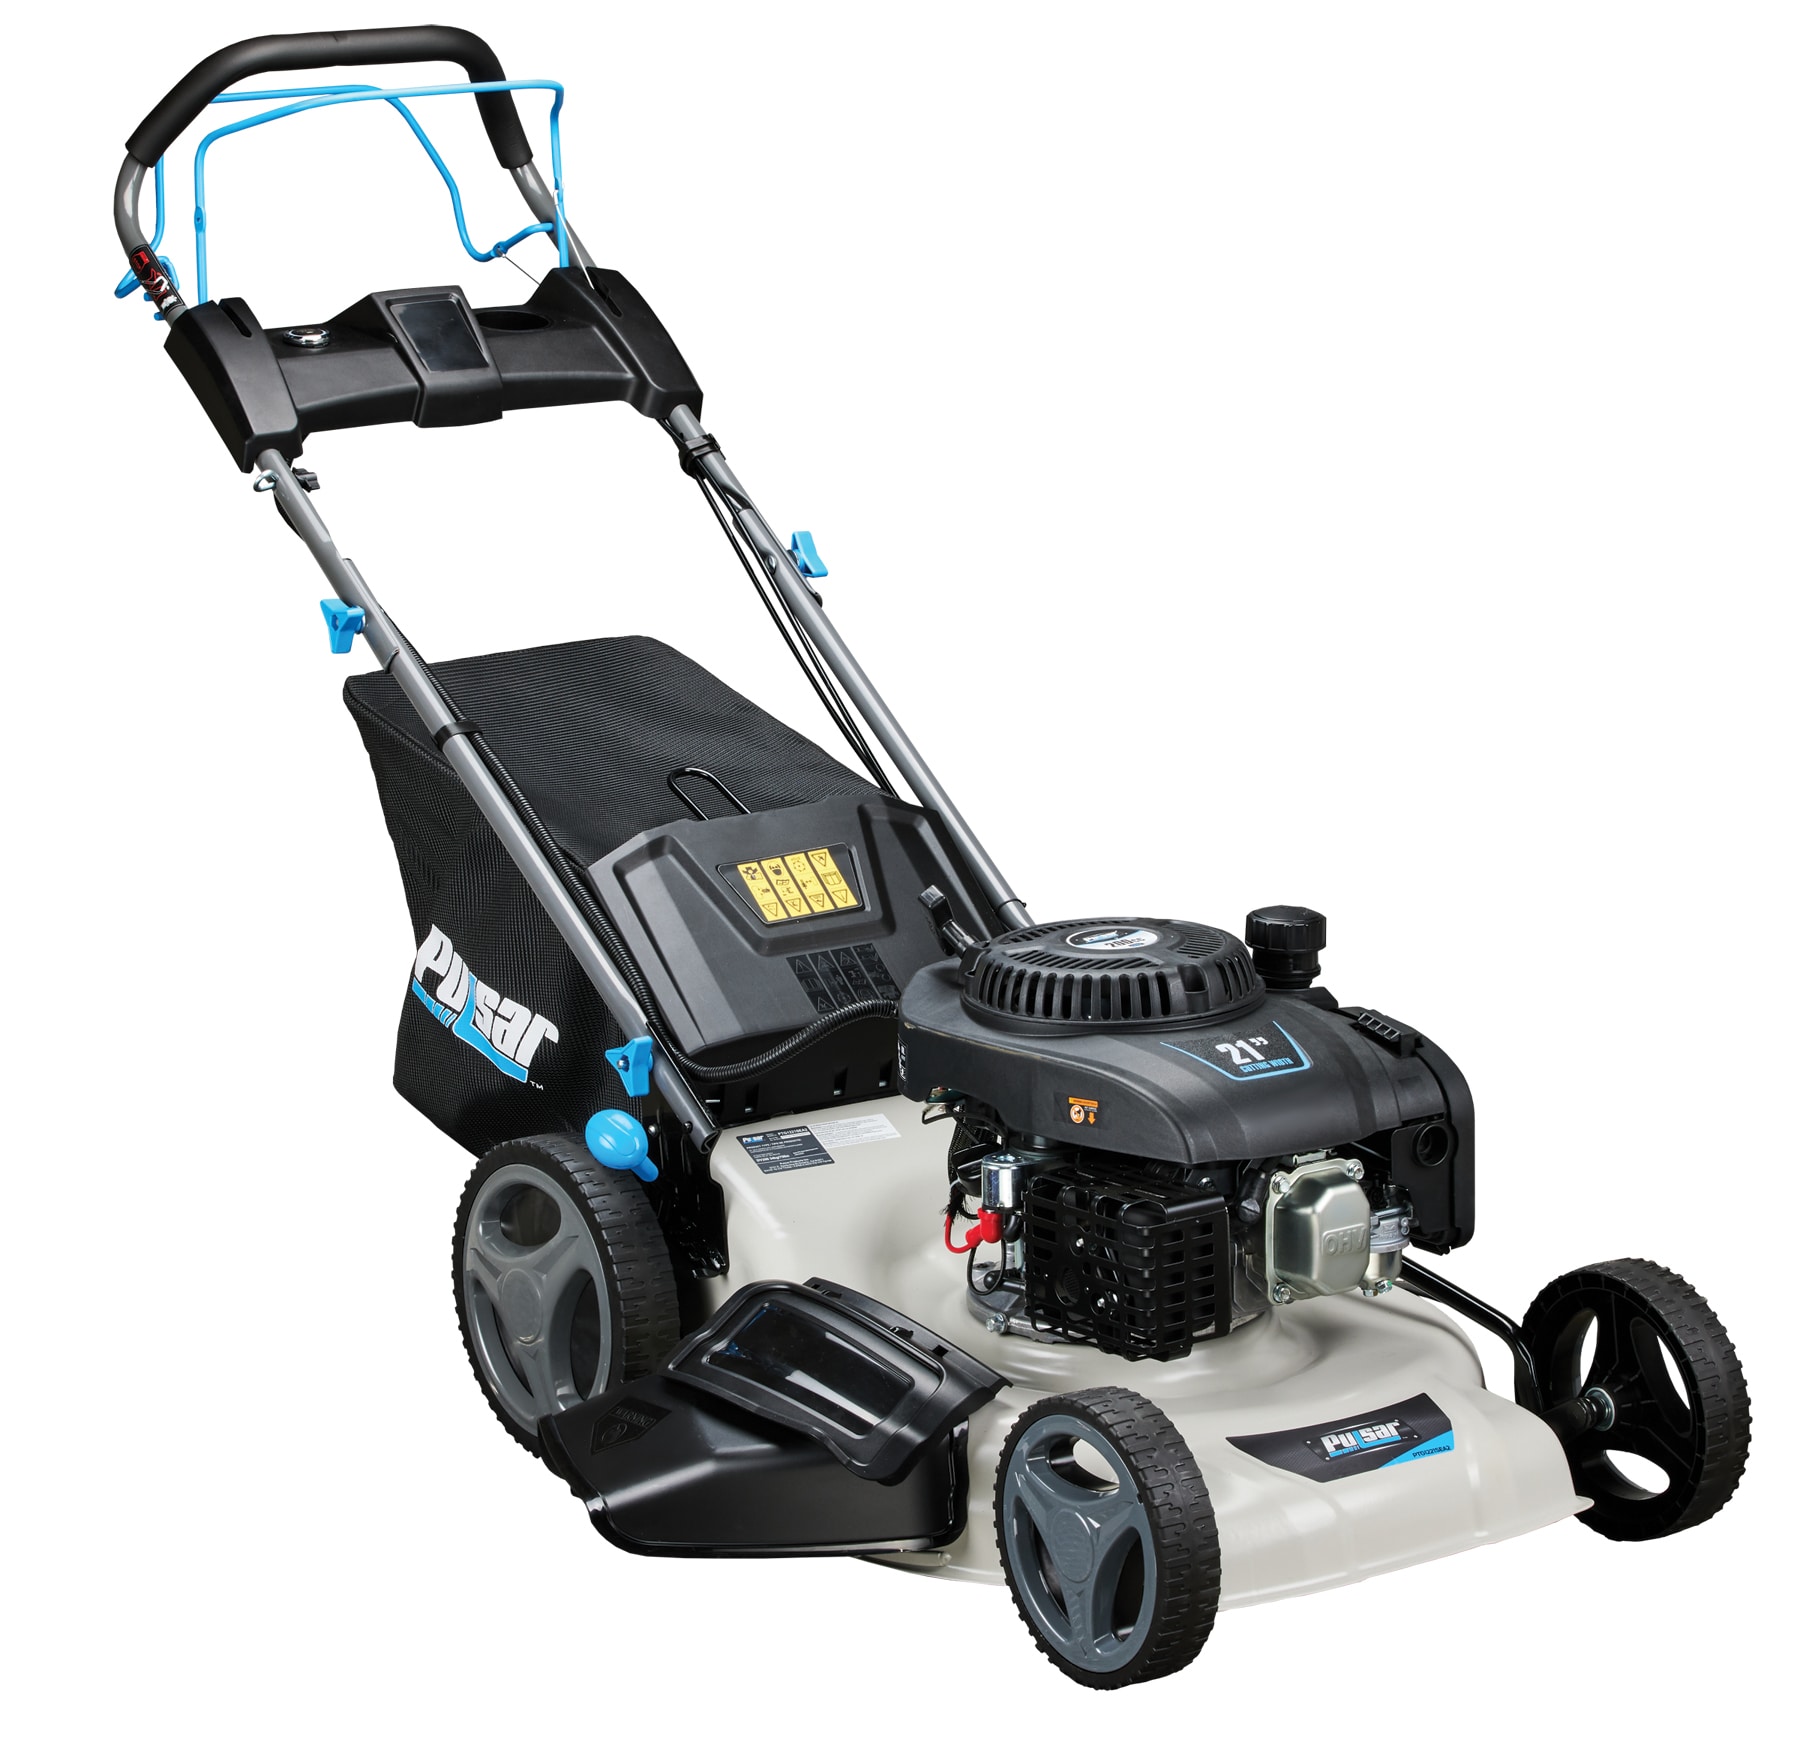 Electric start Gas Push Lawn Mowers at